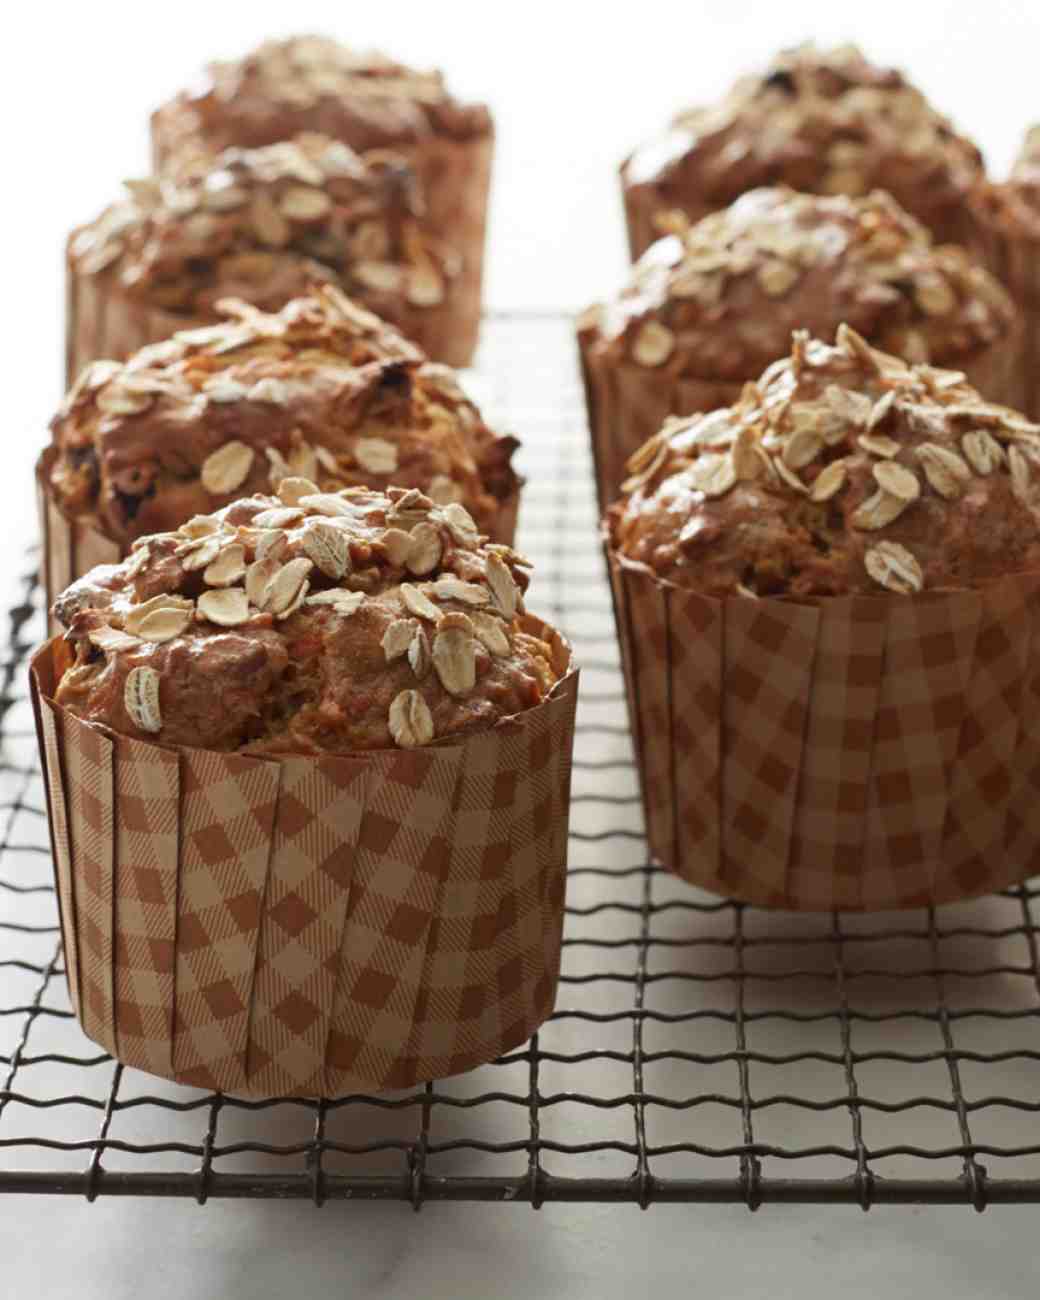 martha-bakes-healthy-morning-muffin-cropped-025-d110936-0614_vert